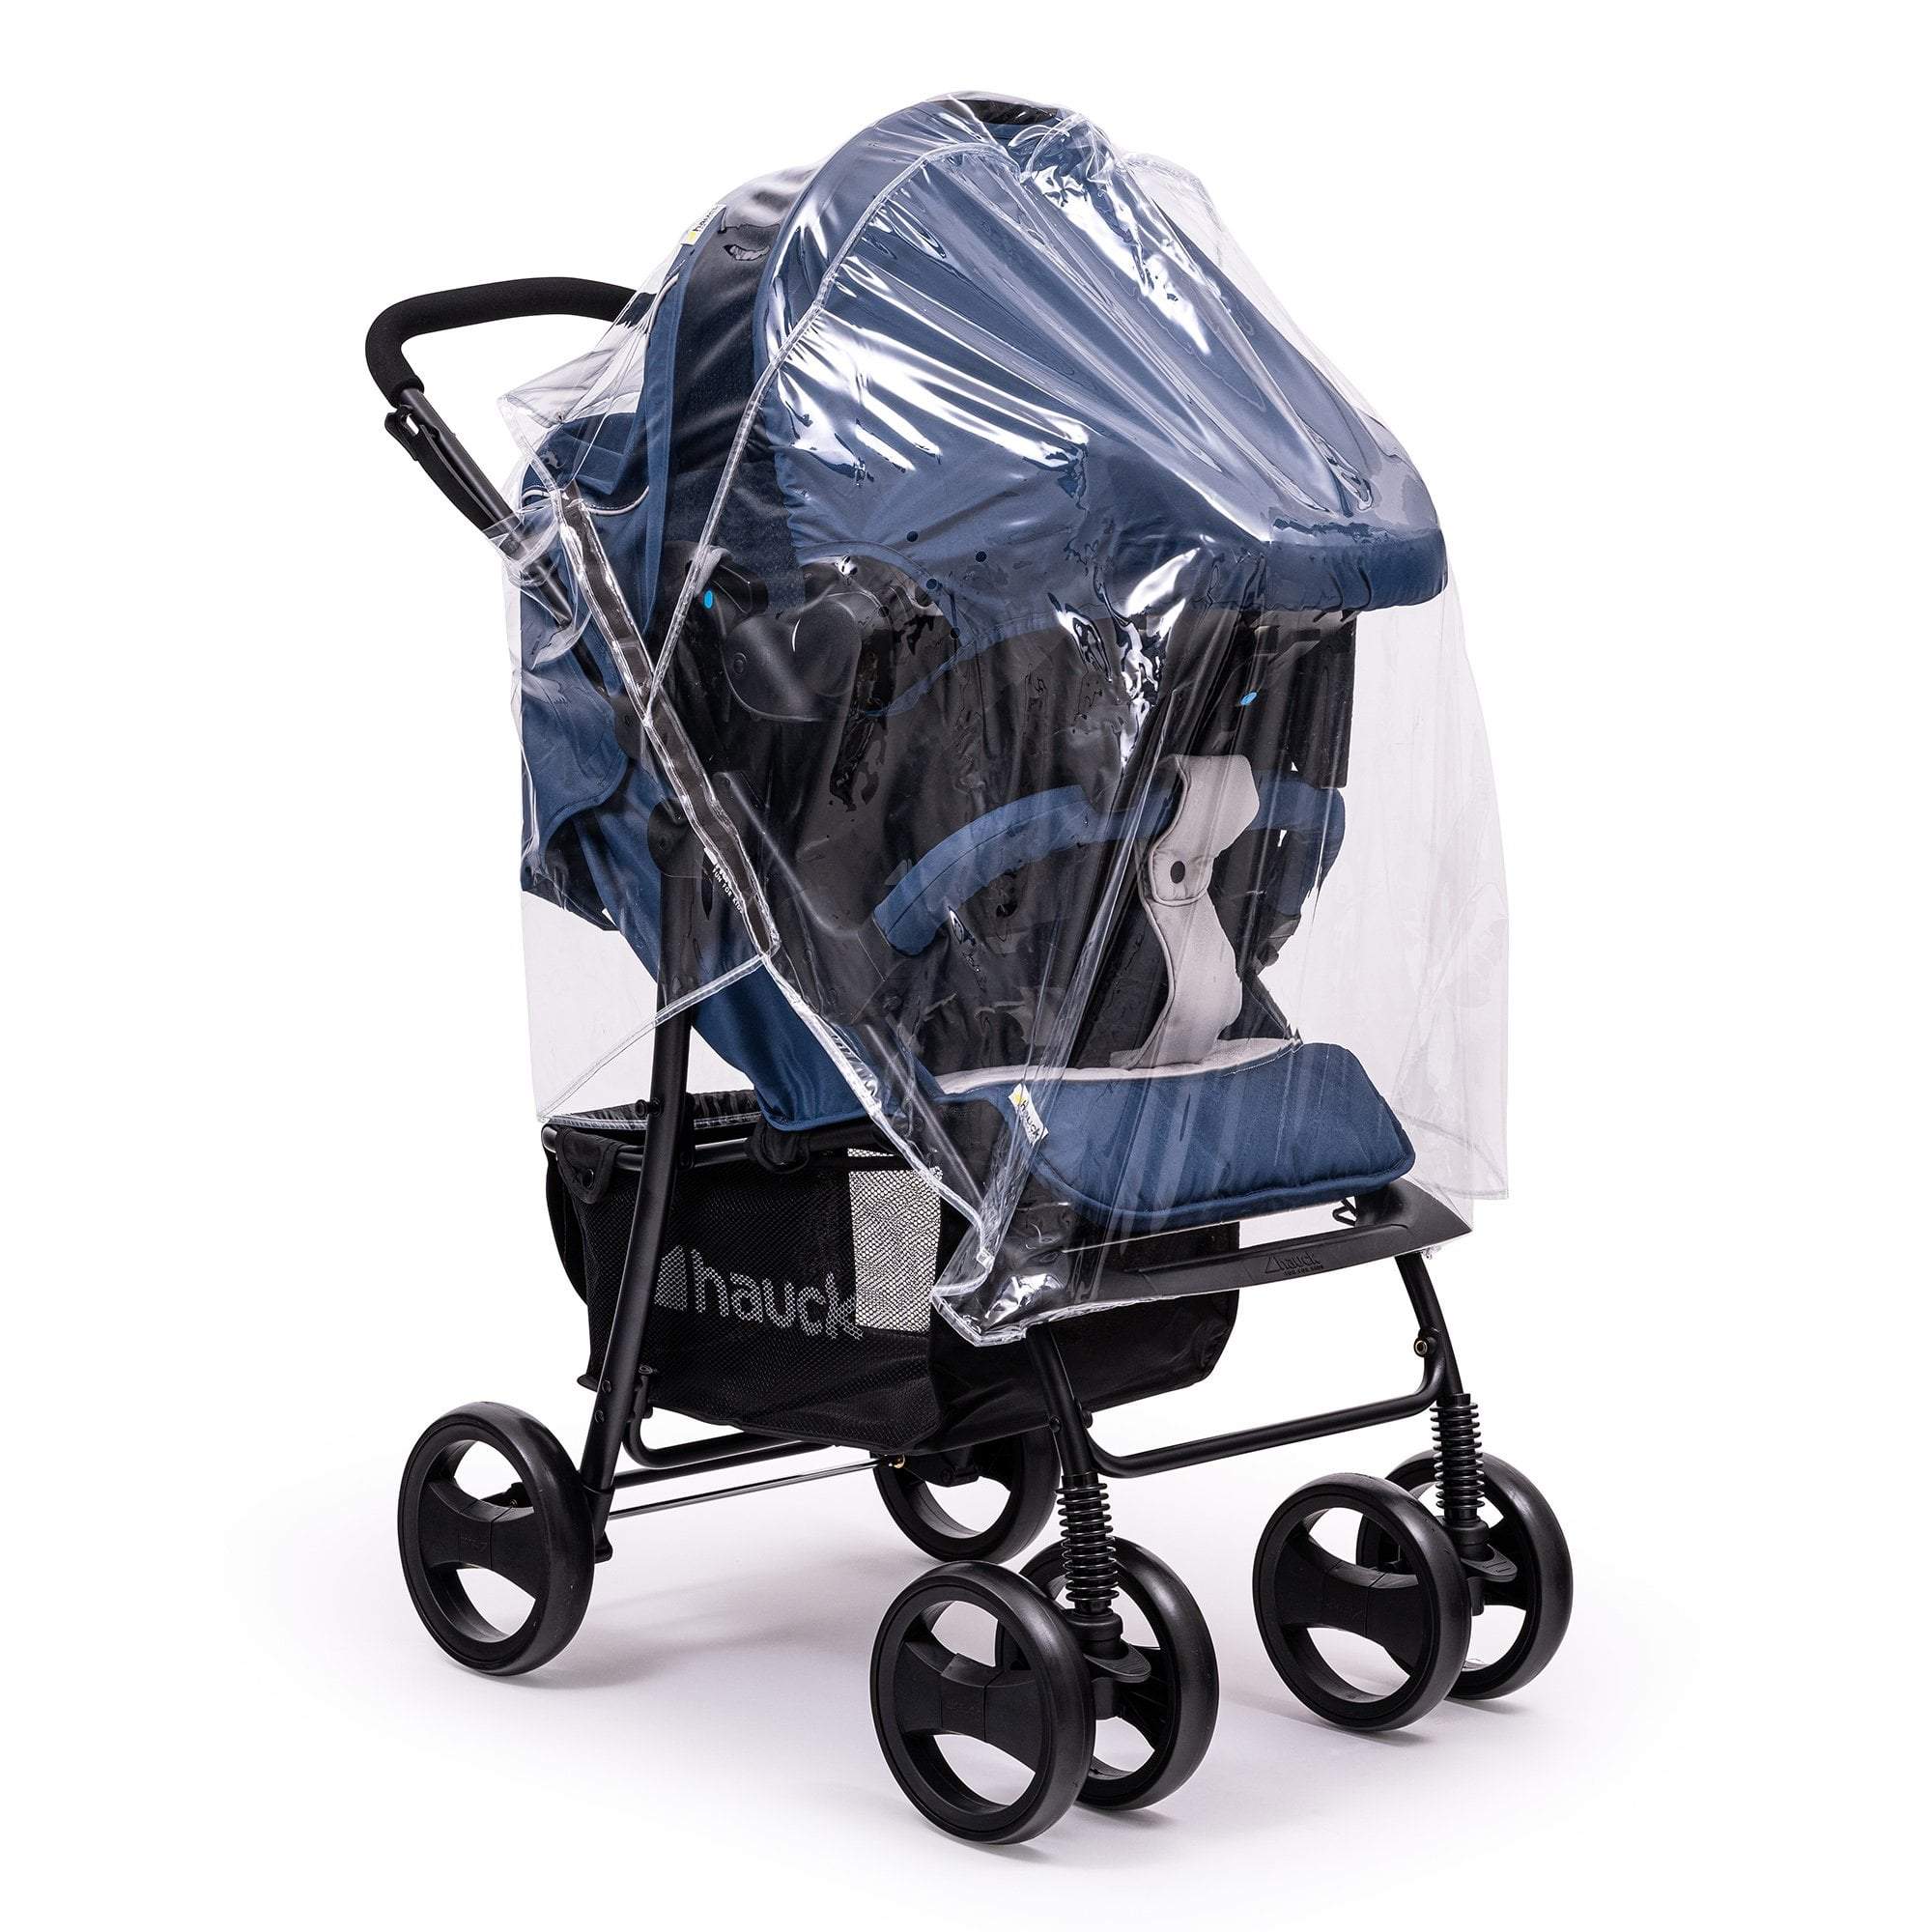 Travel System Raincover Compatible with BabySun - Fits All Models - For Your Little One